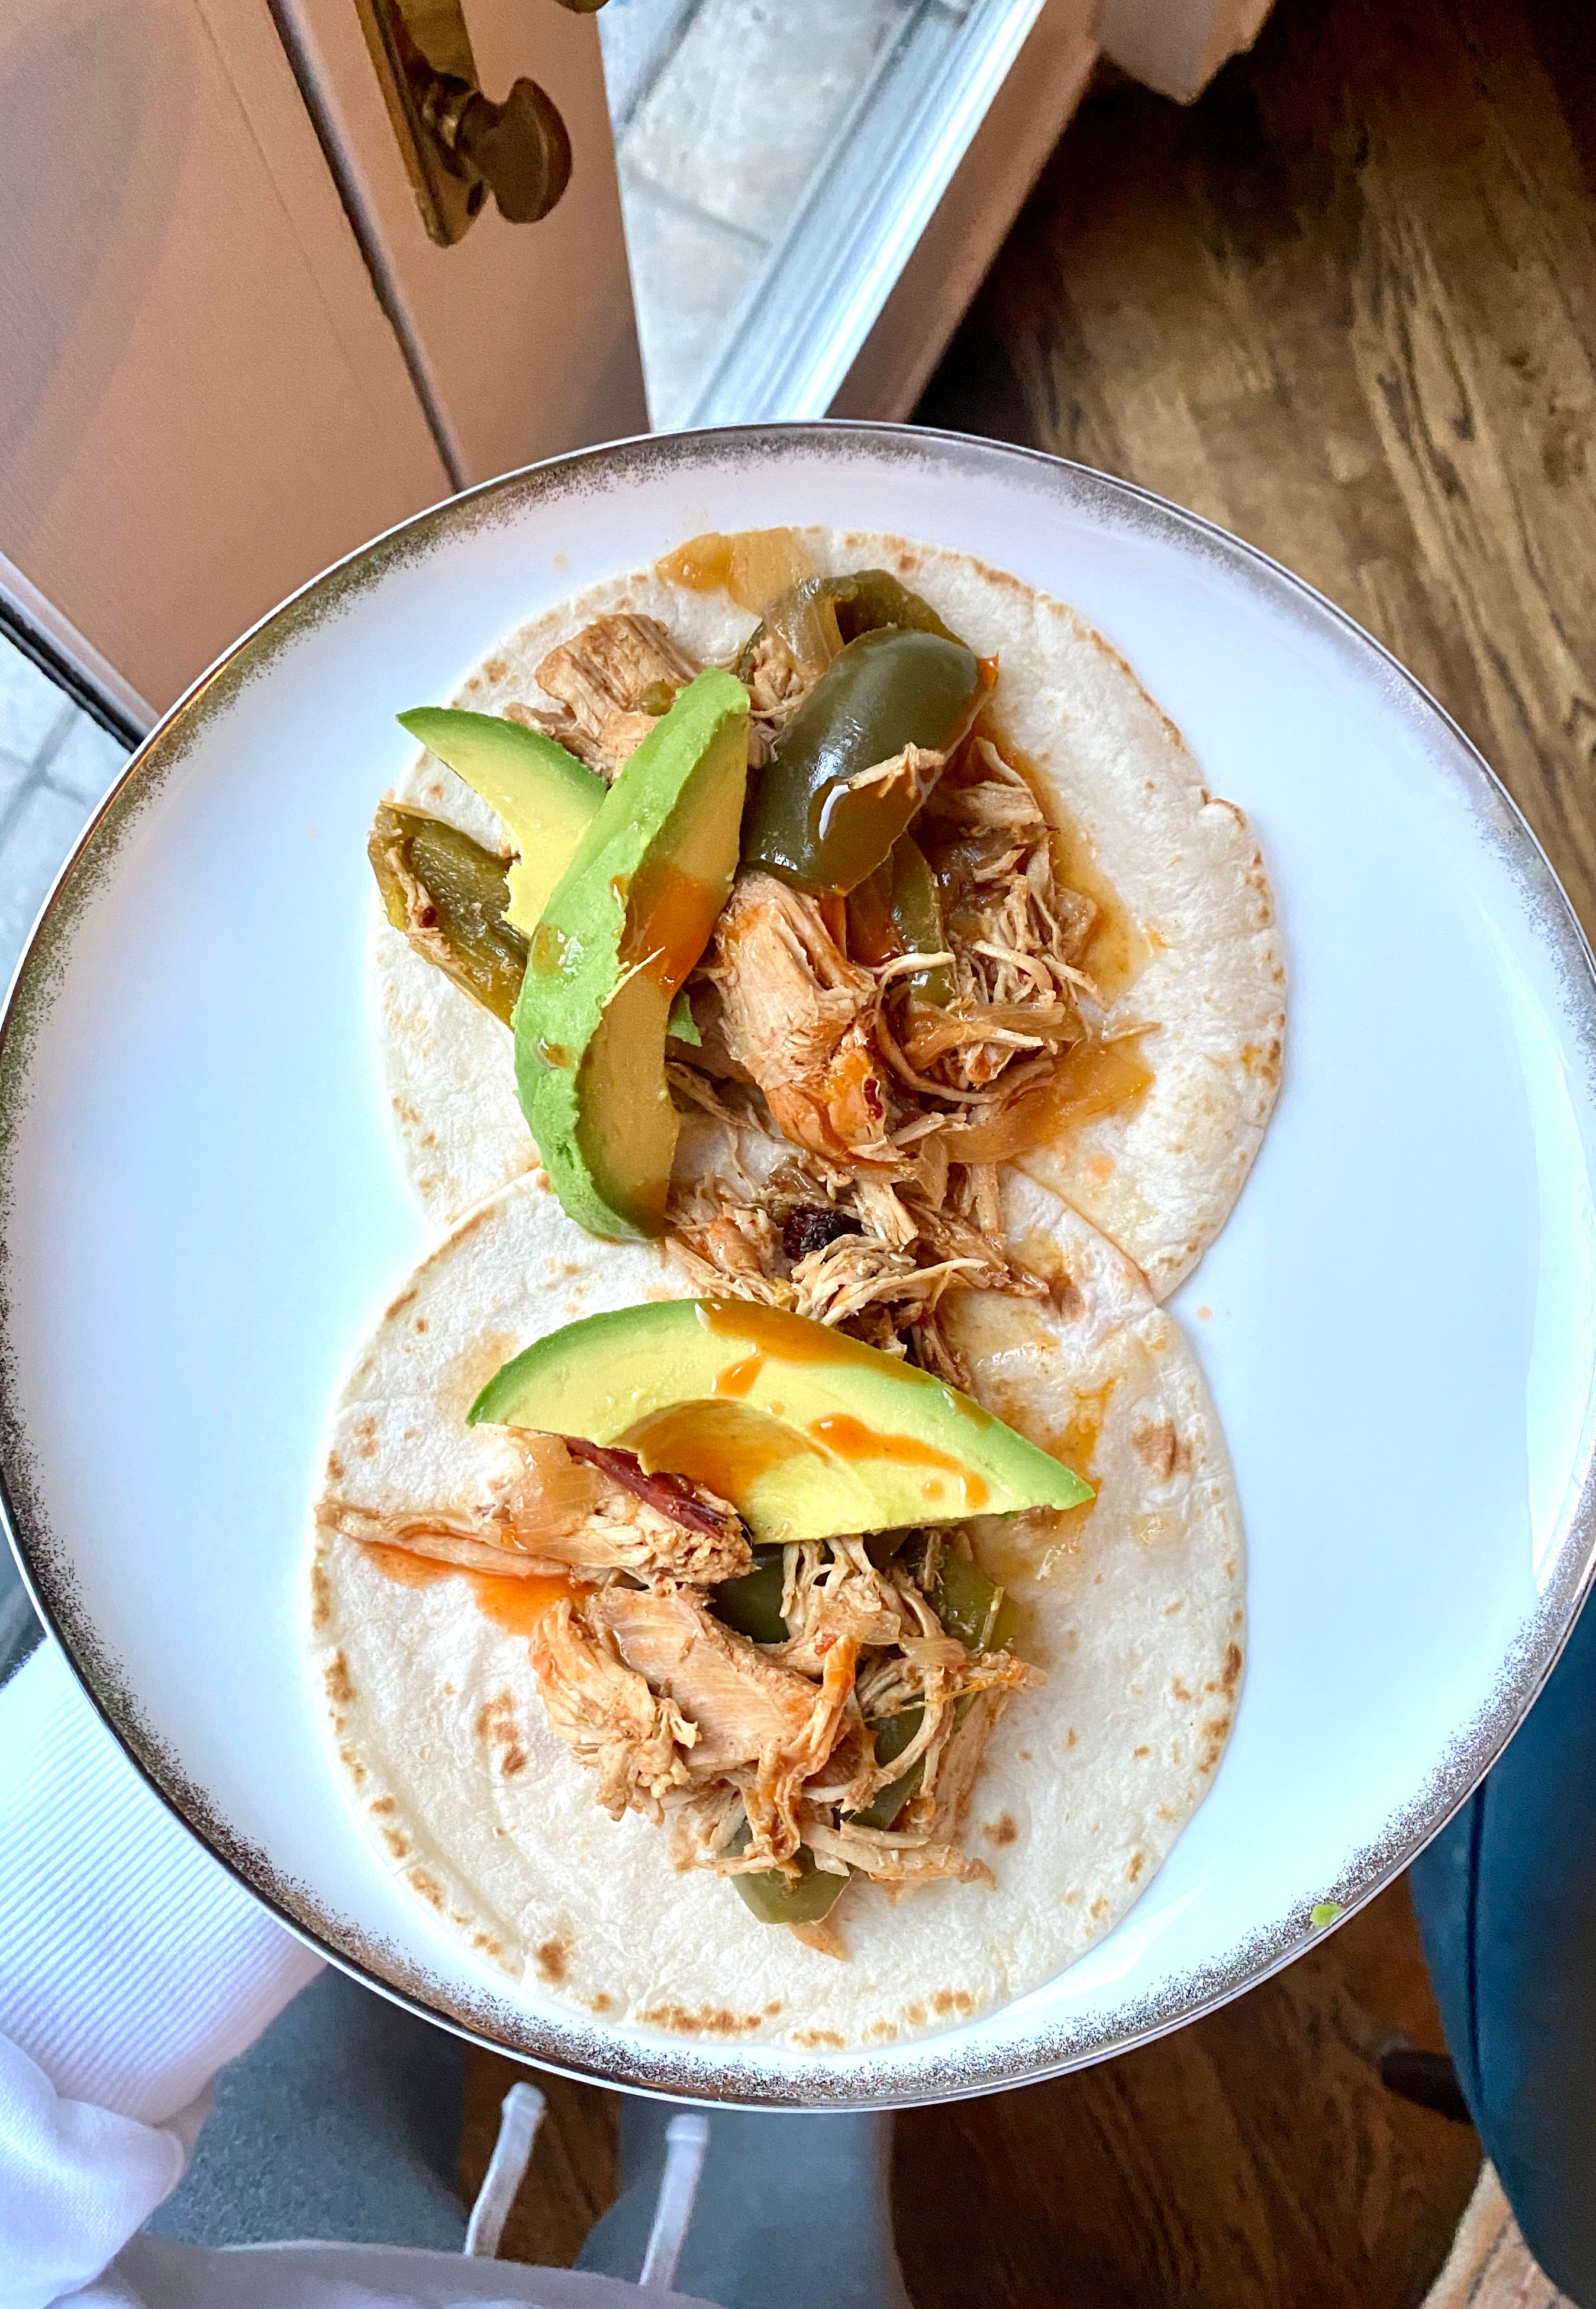 Crockpot chicken fajitas is easy and something you can make in the crockpot in the morning and it's ready by dinner time. 